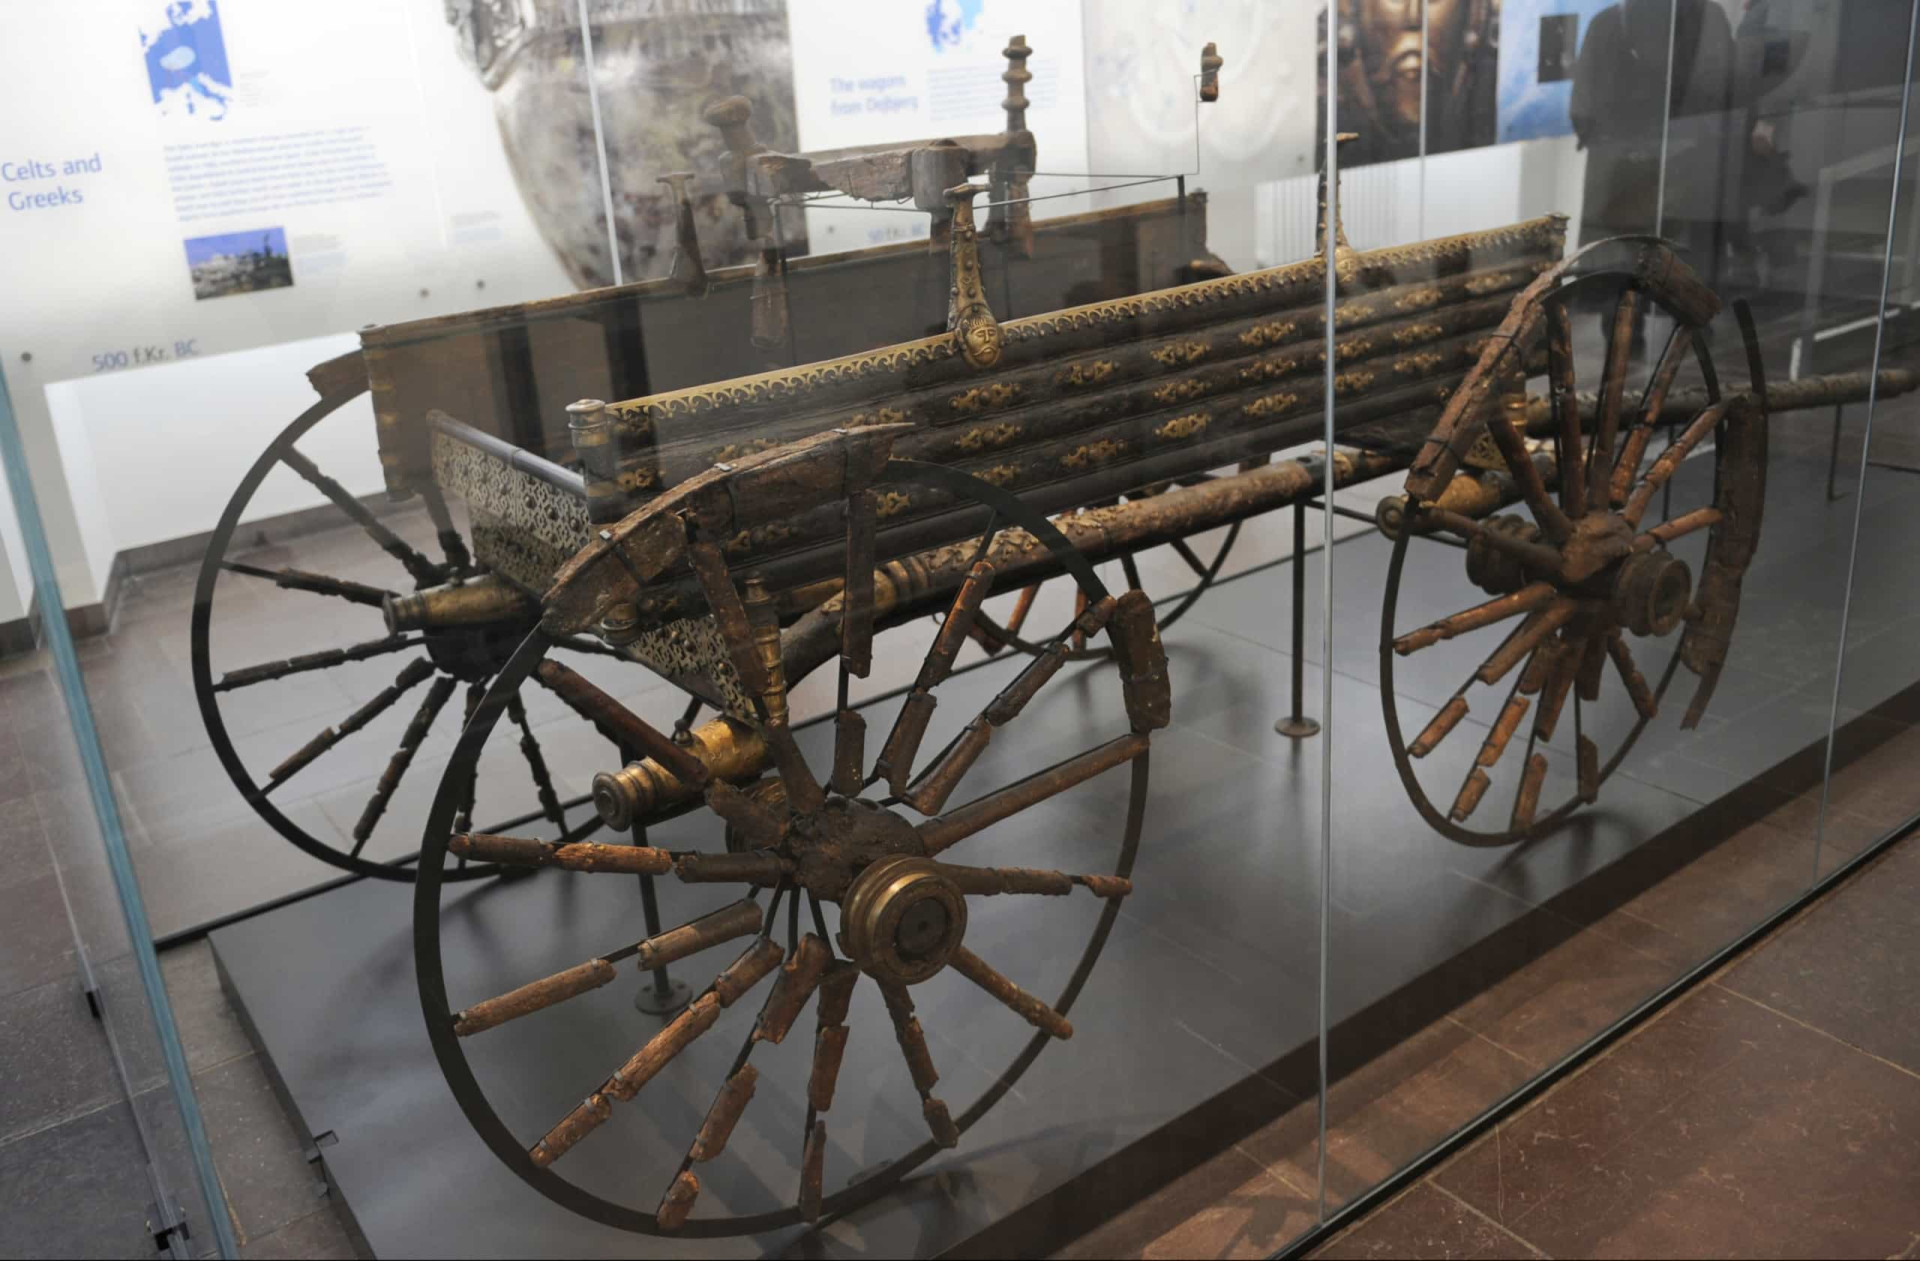 <p>Some of the earliest carriages date back to the Iron Age, constructed by Celtic artisans mainly for ceremonial use. The Dejbjerg Wagon (pictured) is a composite of two ceremonial wagons unearthed in a peat bog in Dejbjerg, Denmark. It's on display at the National Museum of Denmark in Copenhagen.</p><p><a href="https://www.msn.com/en-us/community/channel/vid-7xx8mnucu55yw63we9va2gwr7uihbxwc68fxqp25x6tg4ftibpra?cvid=94631541bc0f4f89bfd59158d696ad7e">Follow us and access great exclusive content every day</a></p>